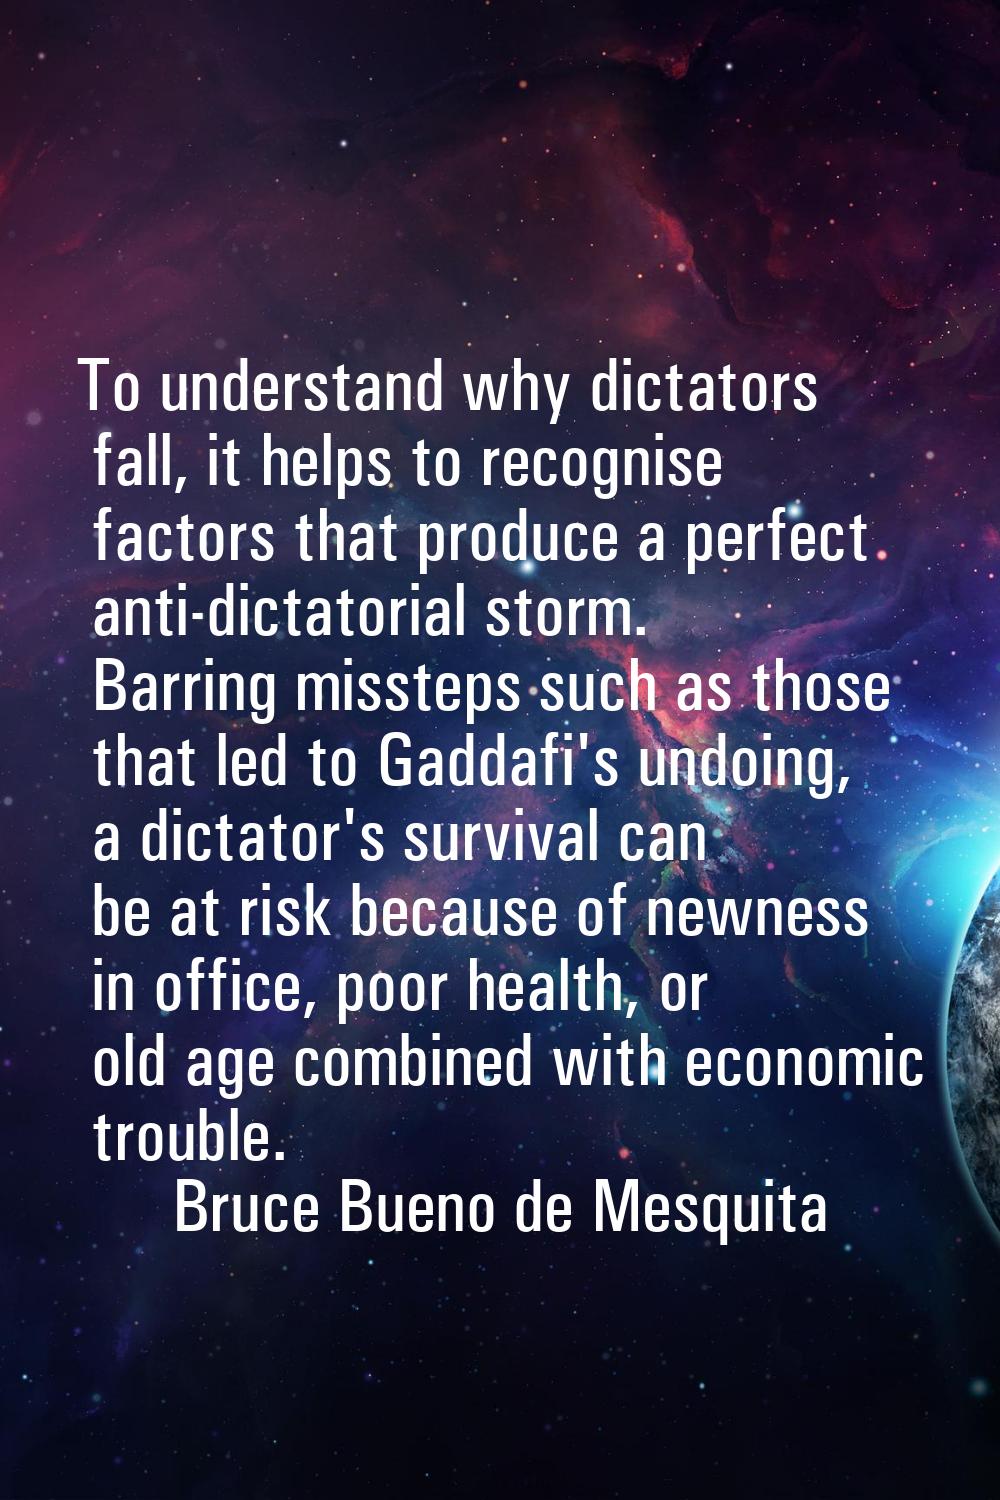 To understand why dictators fall, it helps to recognise factors that produce a perfect anti-dictato